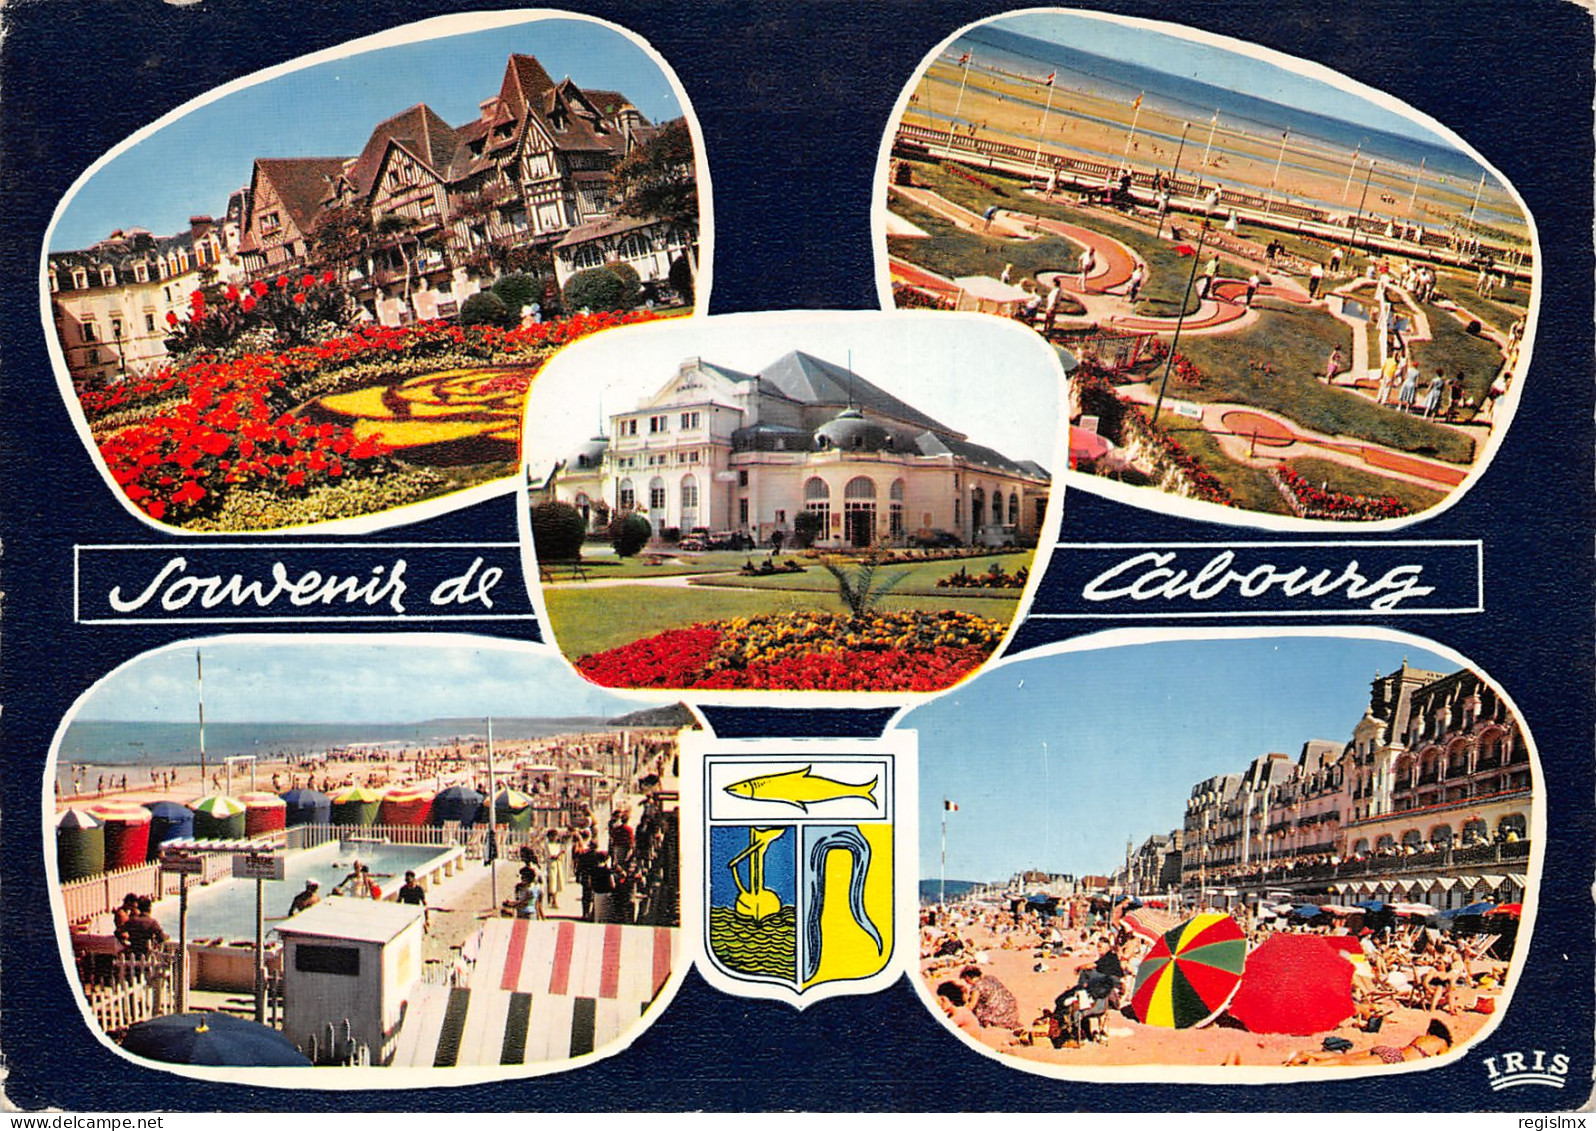 14-CABOURG-N°T2661-C/0053 - Cabourg